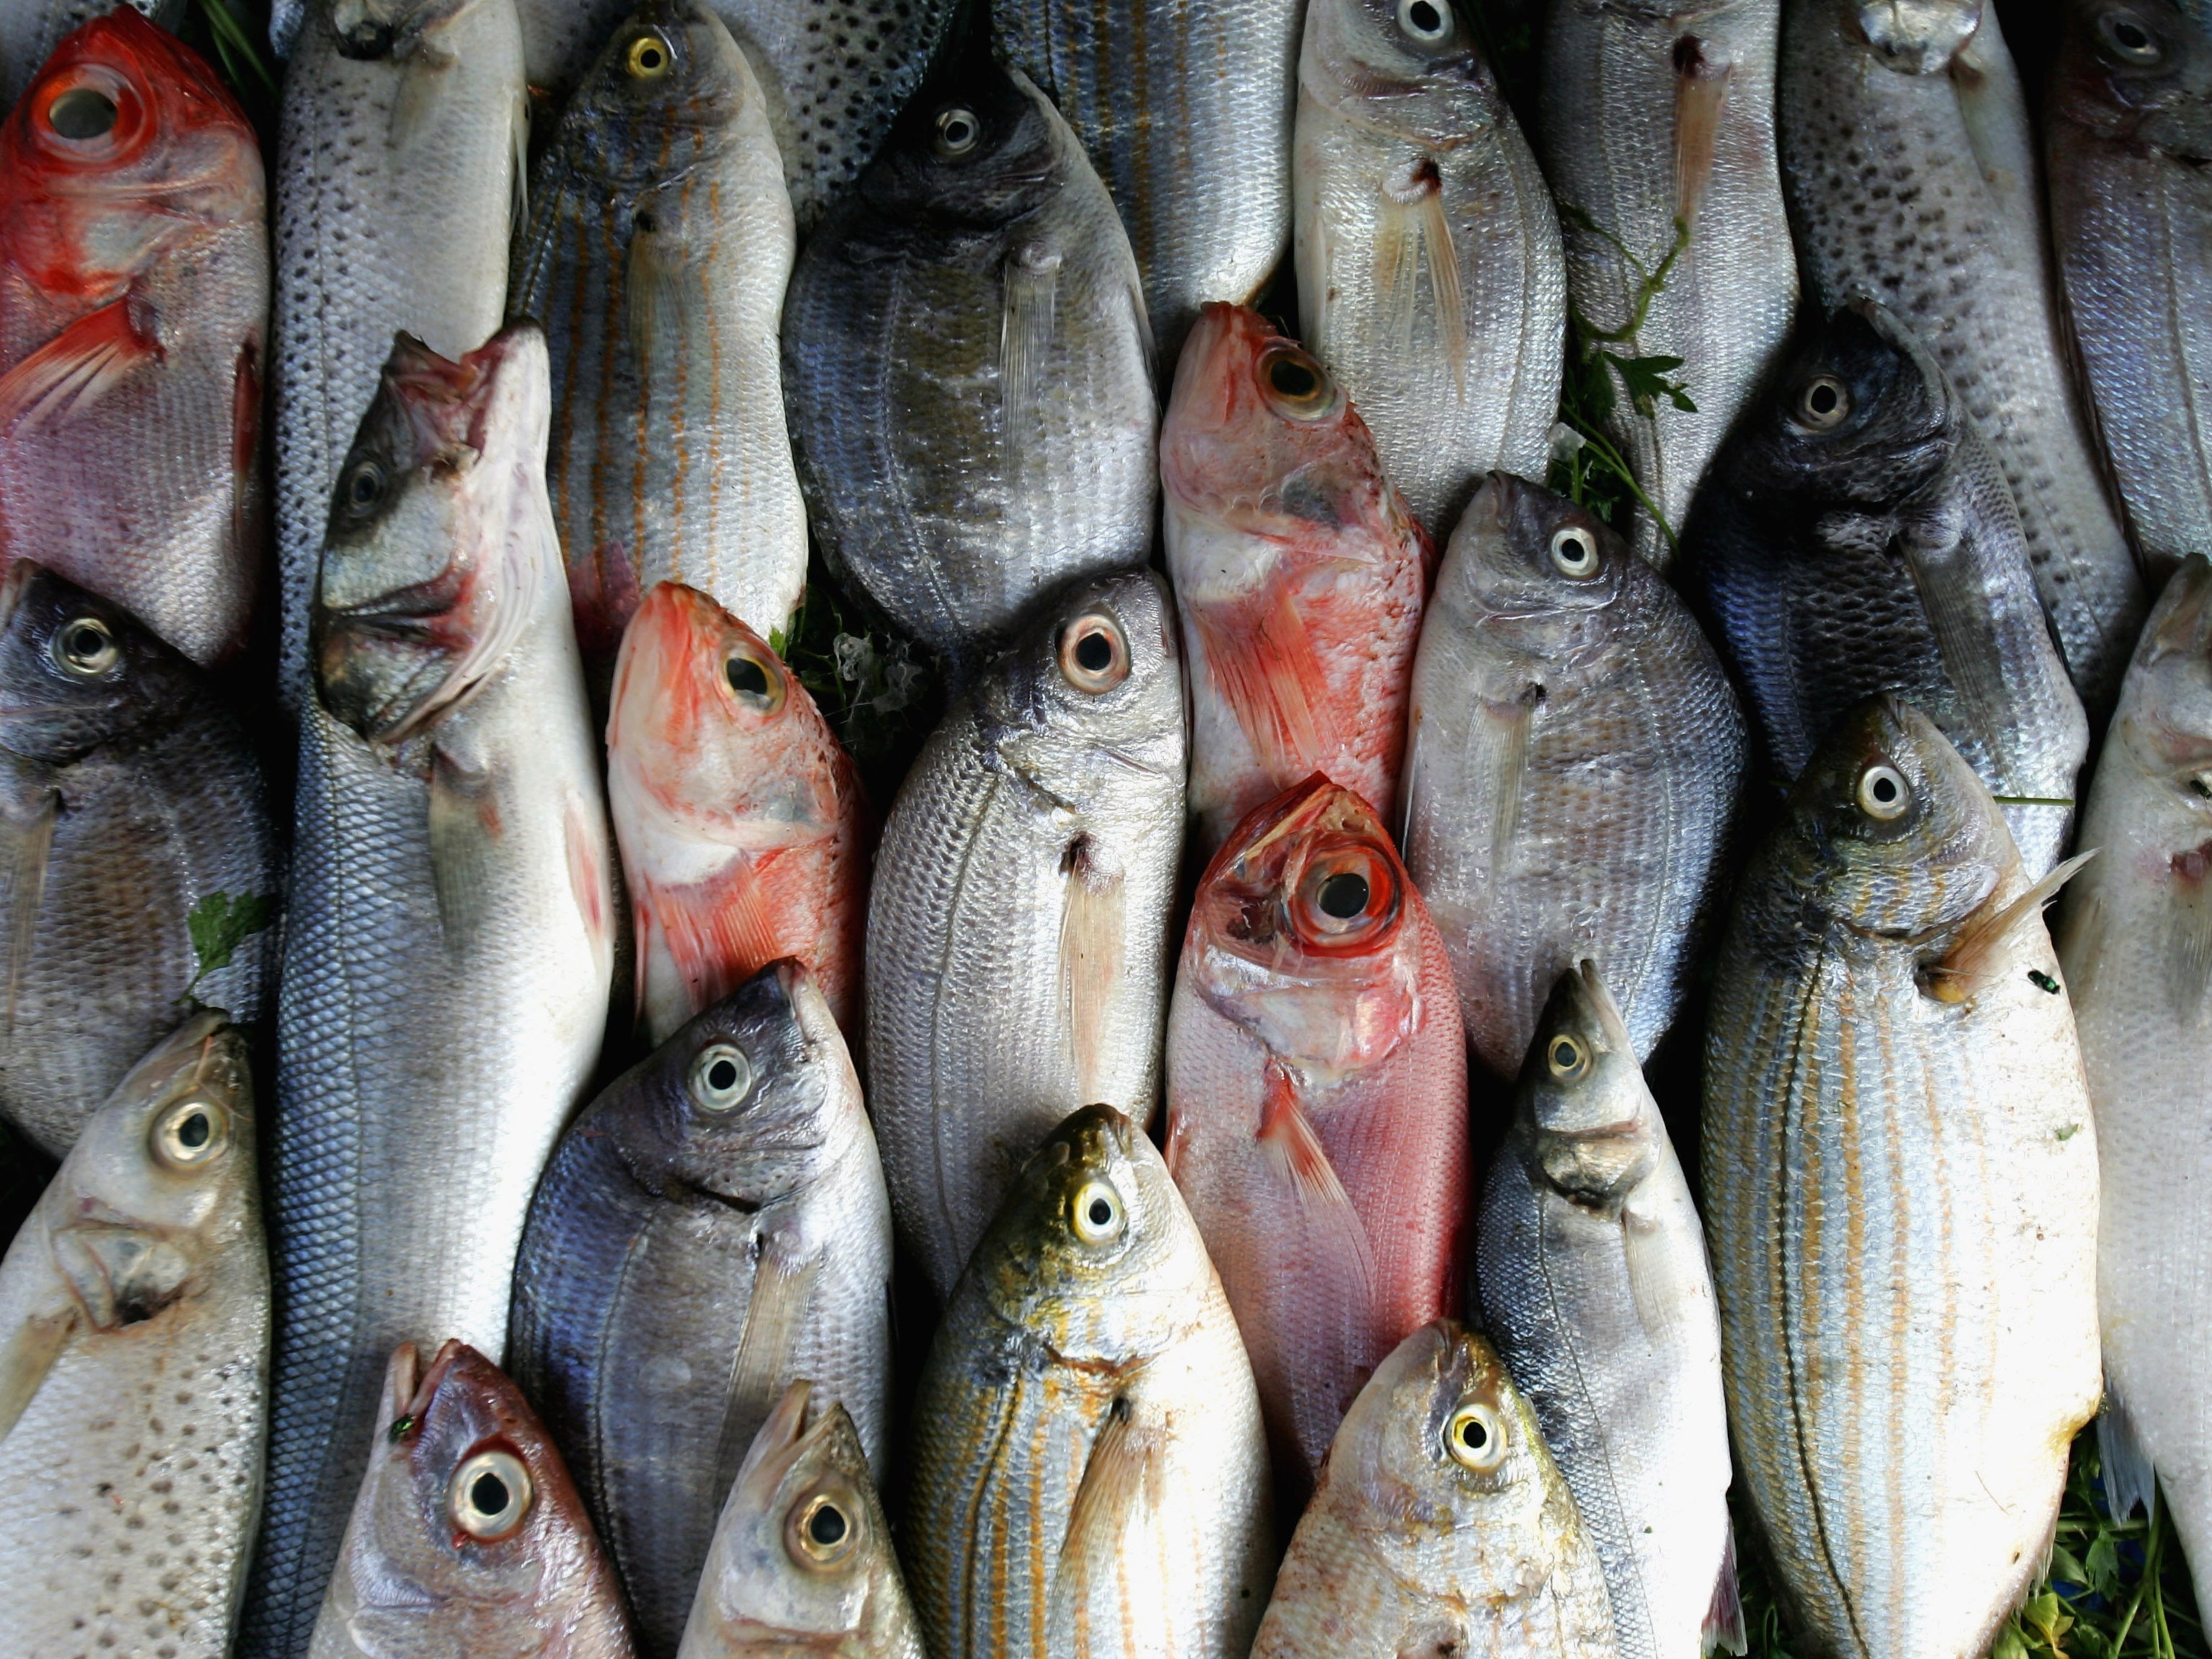 The results suggested “a higher intake of non-fried fish and tuna is associated with melanoma”